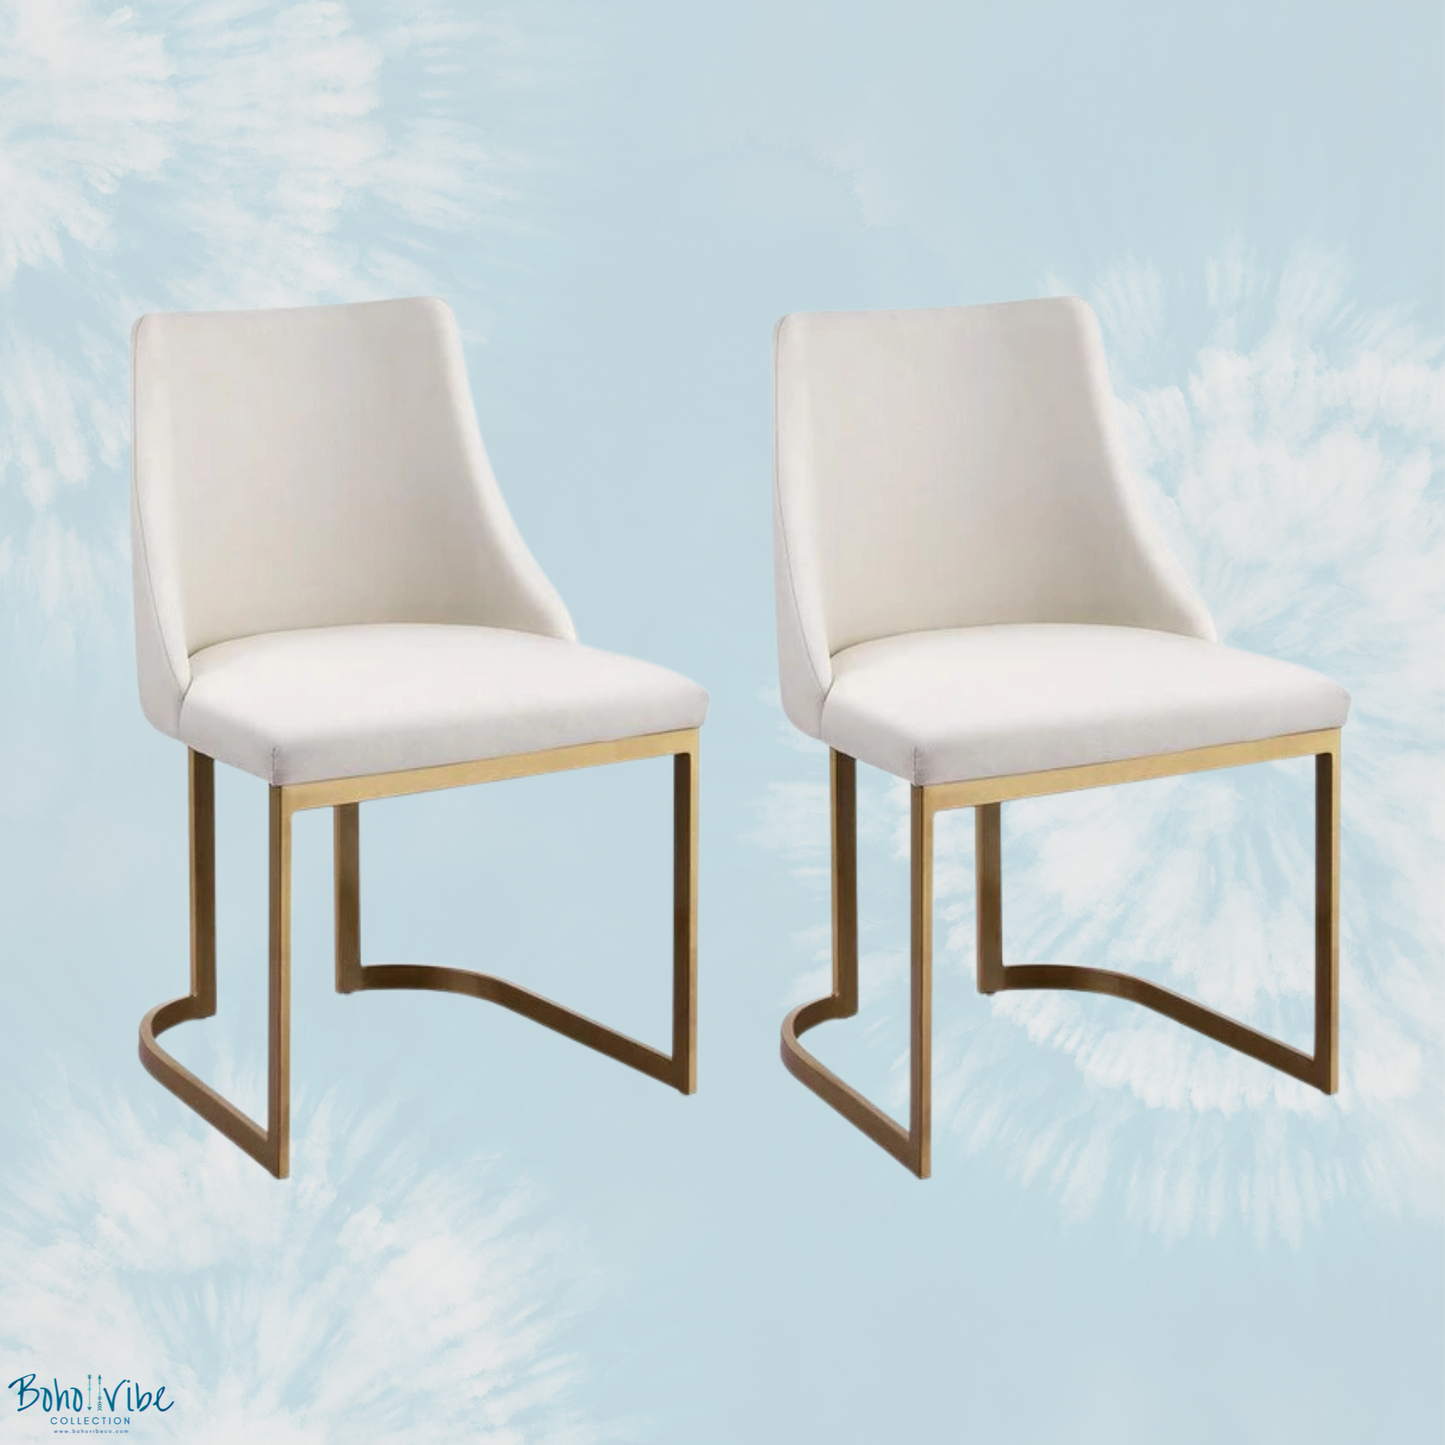   Boho ↡↟ Vibe Collection ↠ Beige Linen Fabric Dining Office Chair with Gold Legs Set of 2